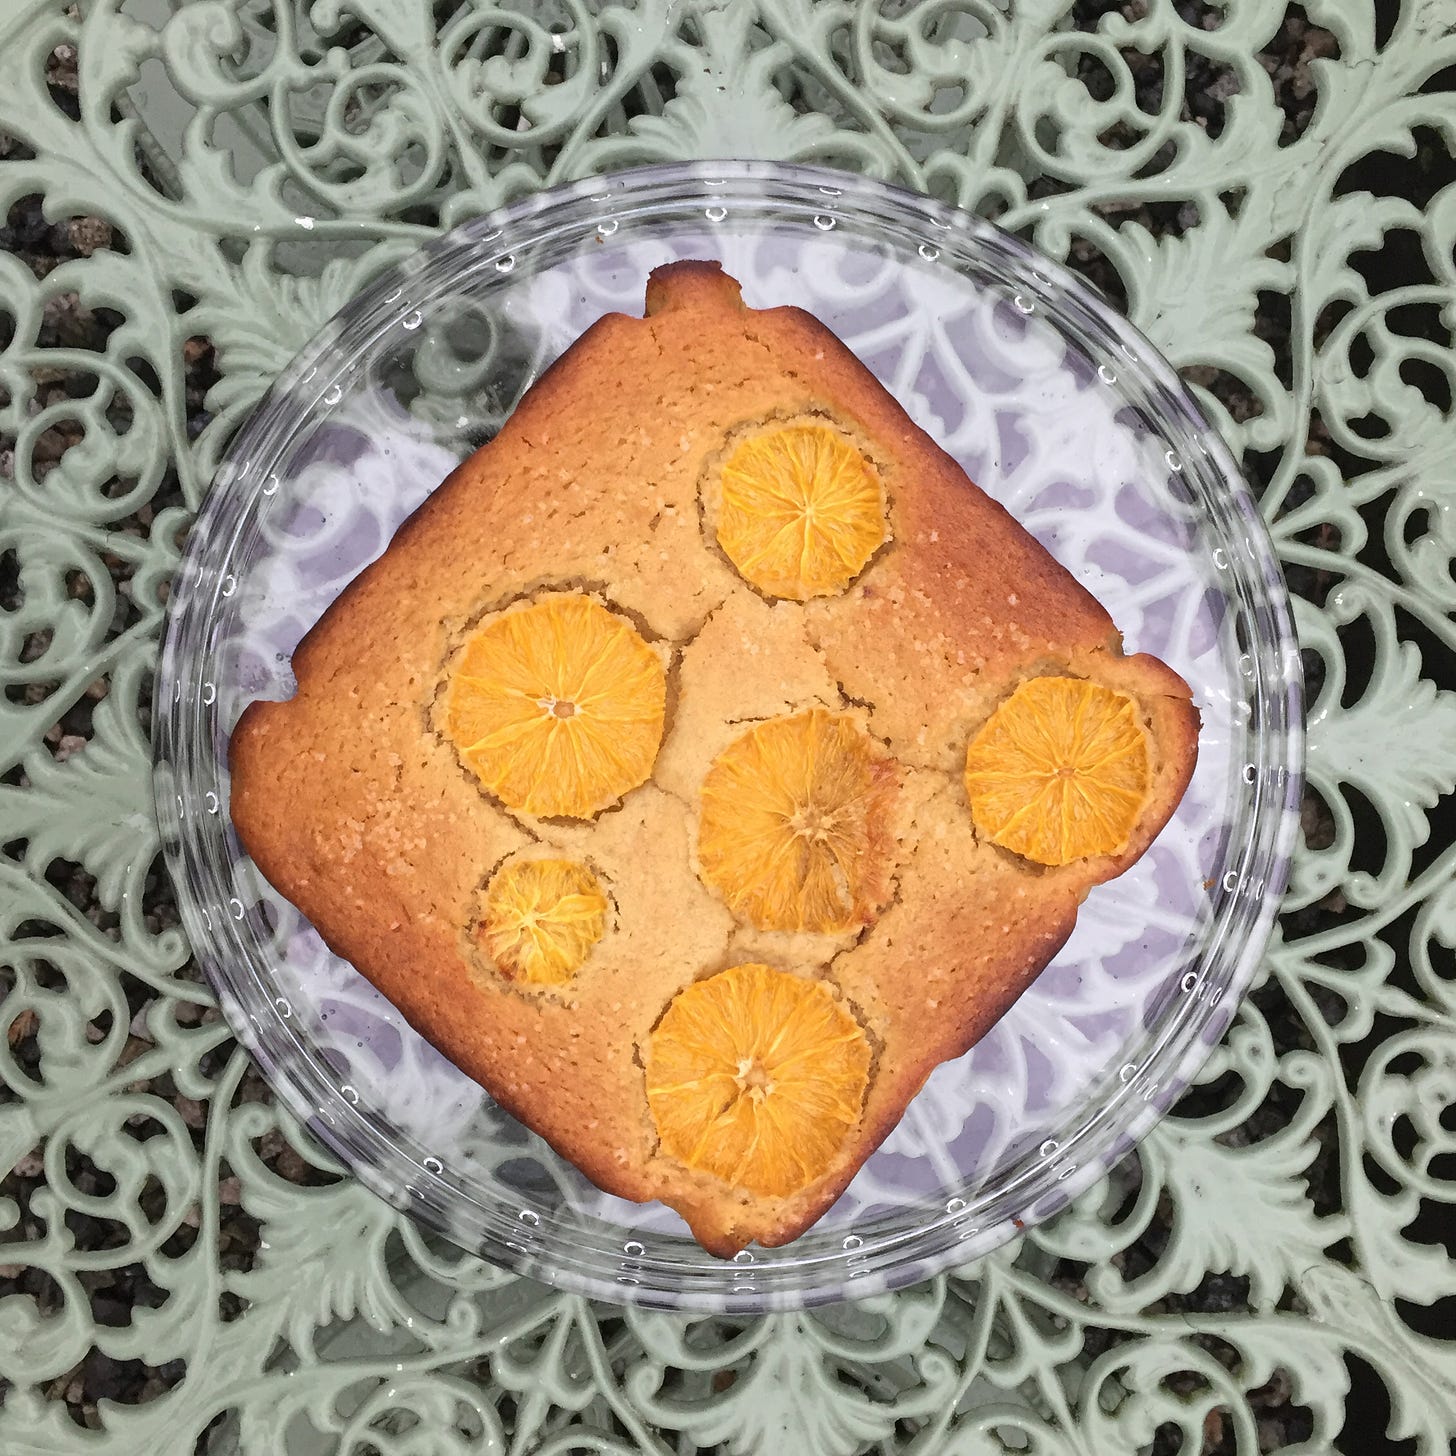 from above, a square cake with browned edges and slices of orange on top sits on a sea green wrought-iron patio table.